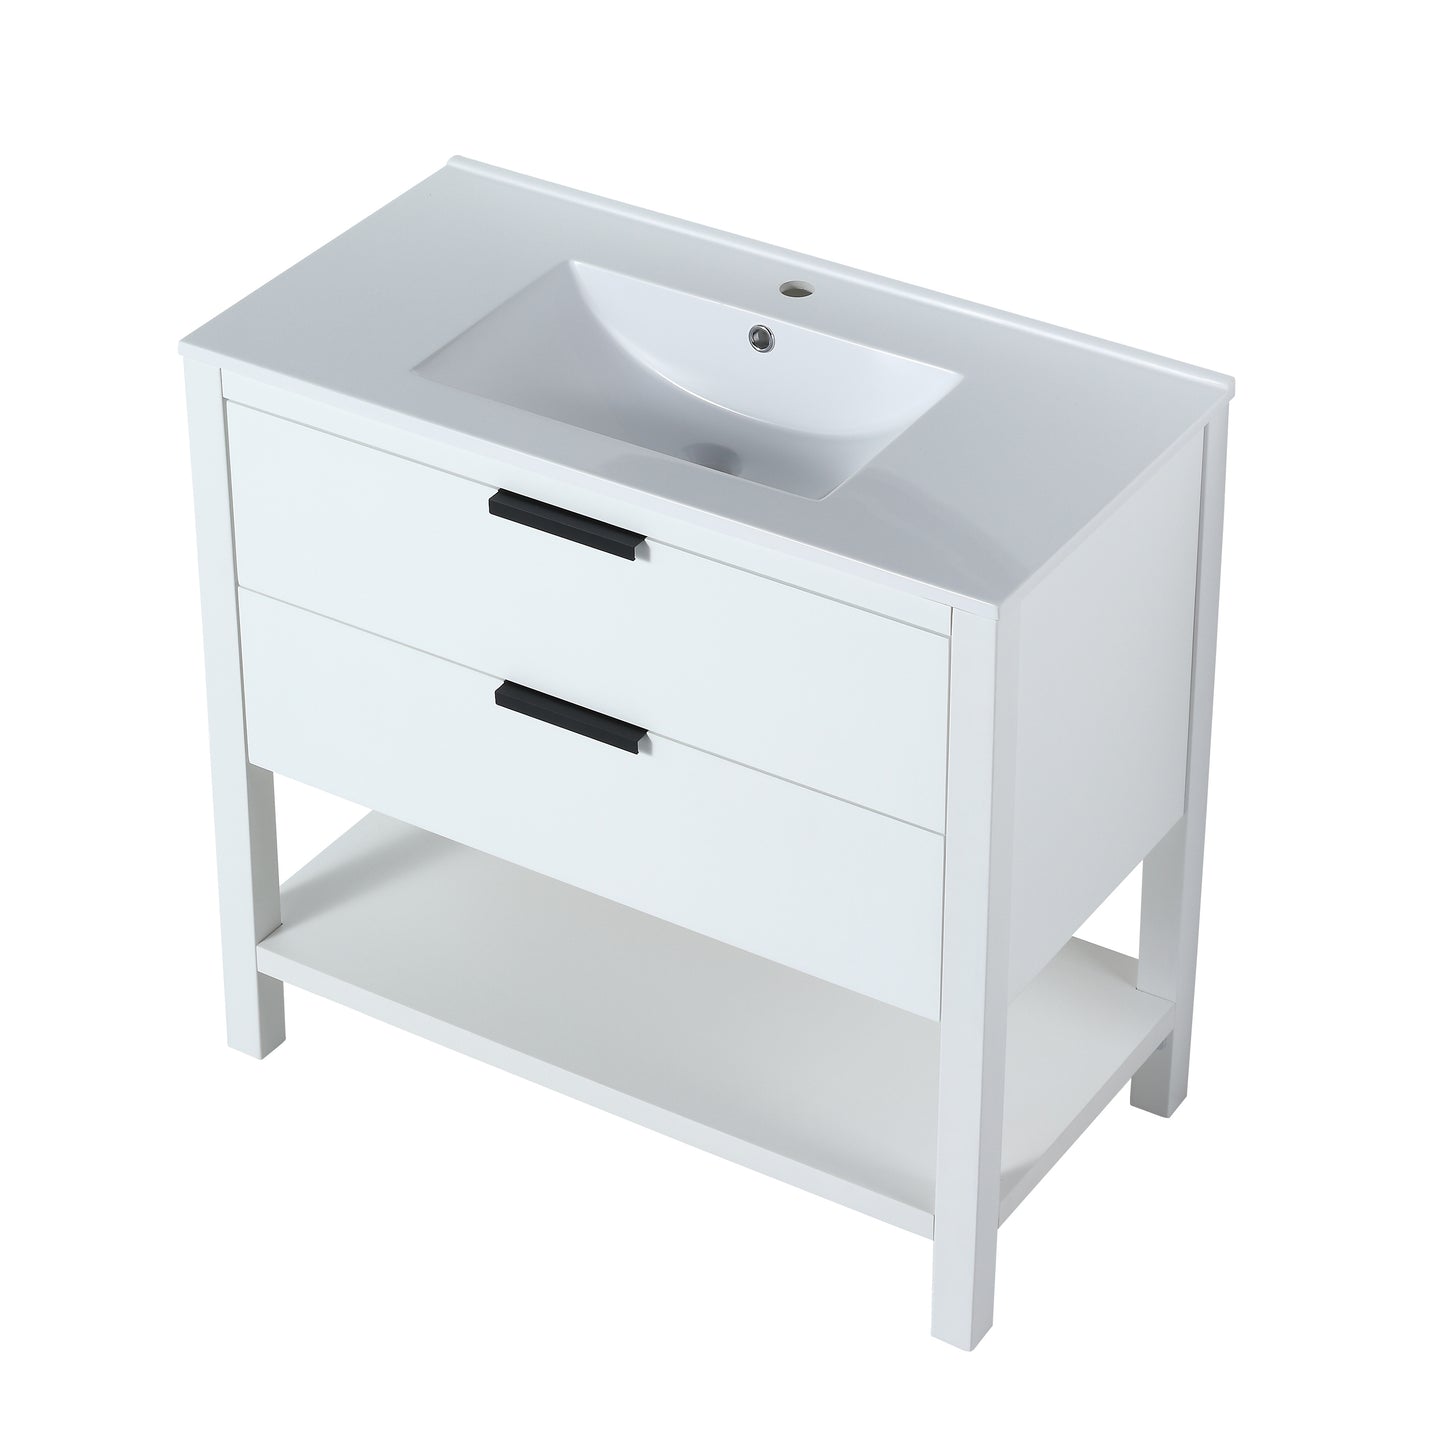 36 Inch Bathroom Vanity Plywood With 2 Drawers,36x18